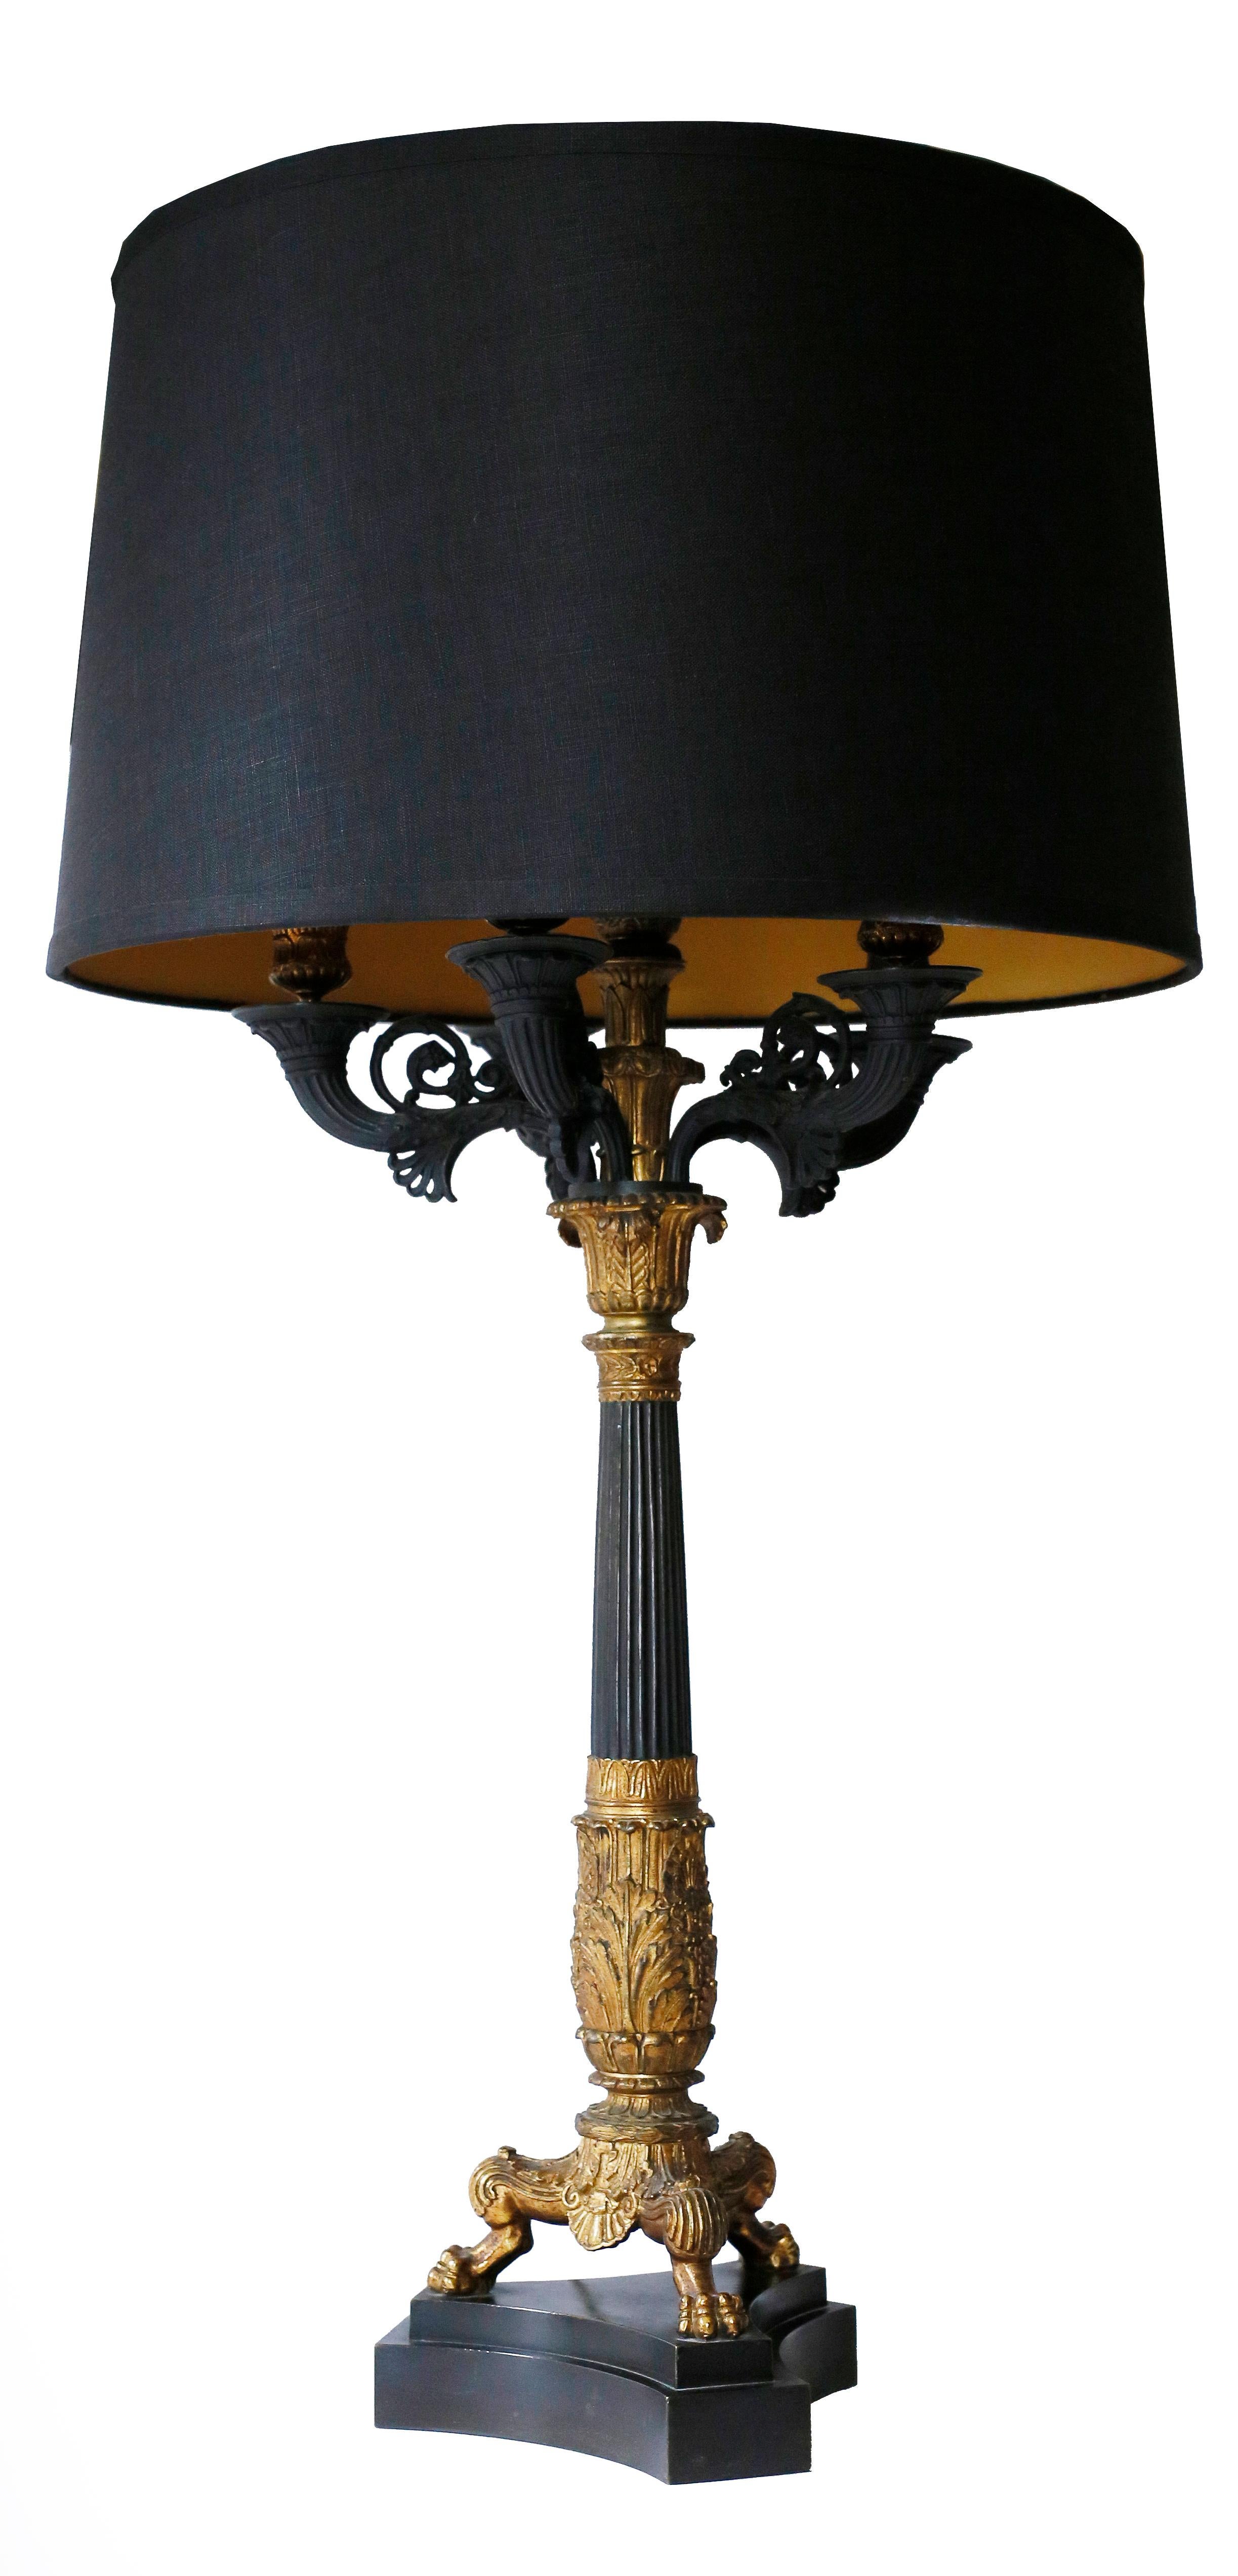 A fine pair of baluster neoclassical lamps of patinated bronze with gold detailing. A black basalt stone base supports a paw-footed tripod with a baluster detailed with fluting and acanthus. The five light candle supports exhibit scrolls and bronze